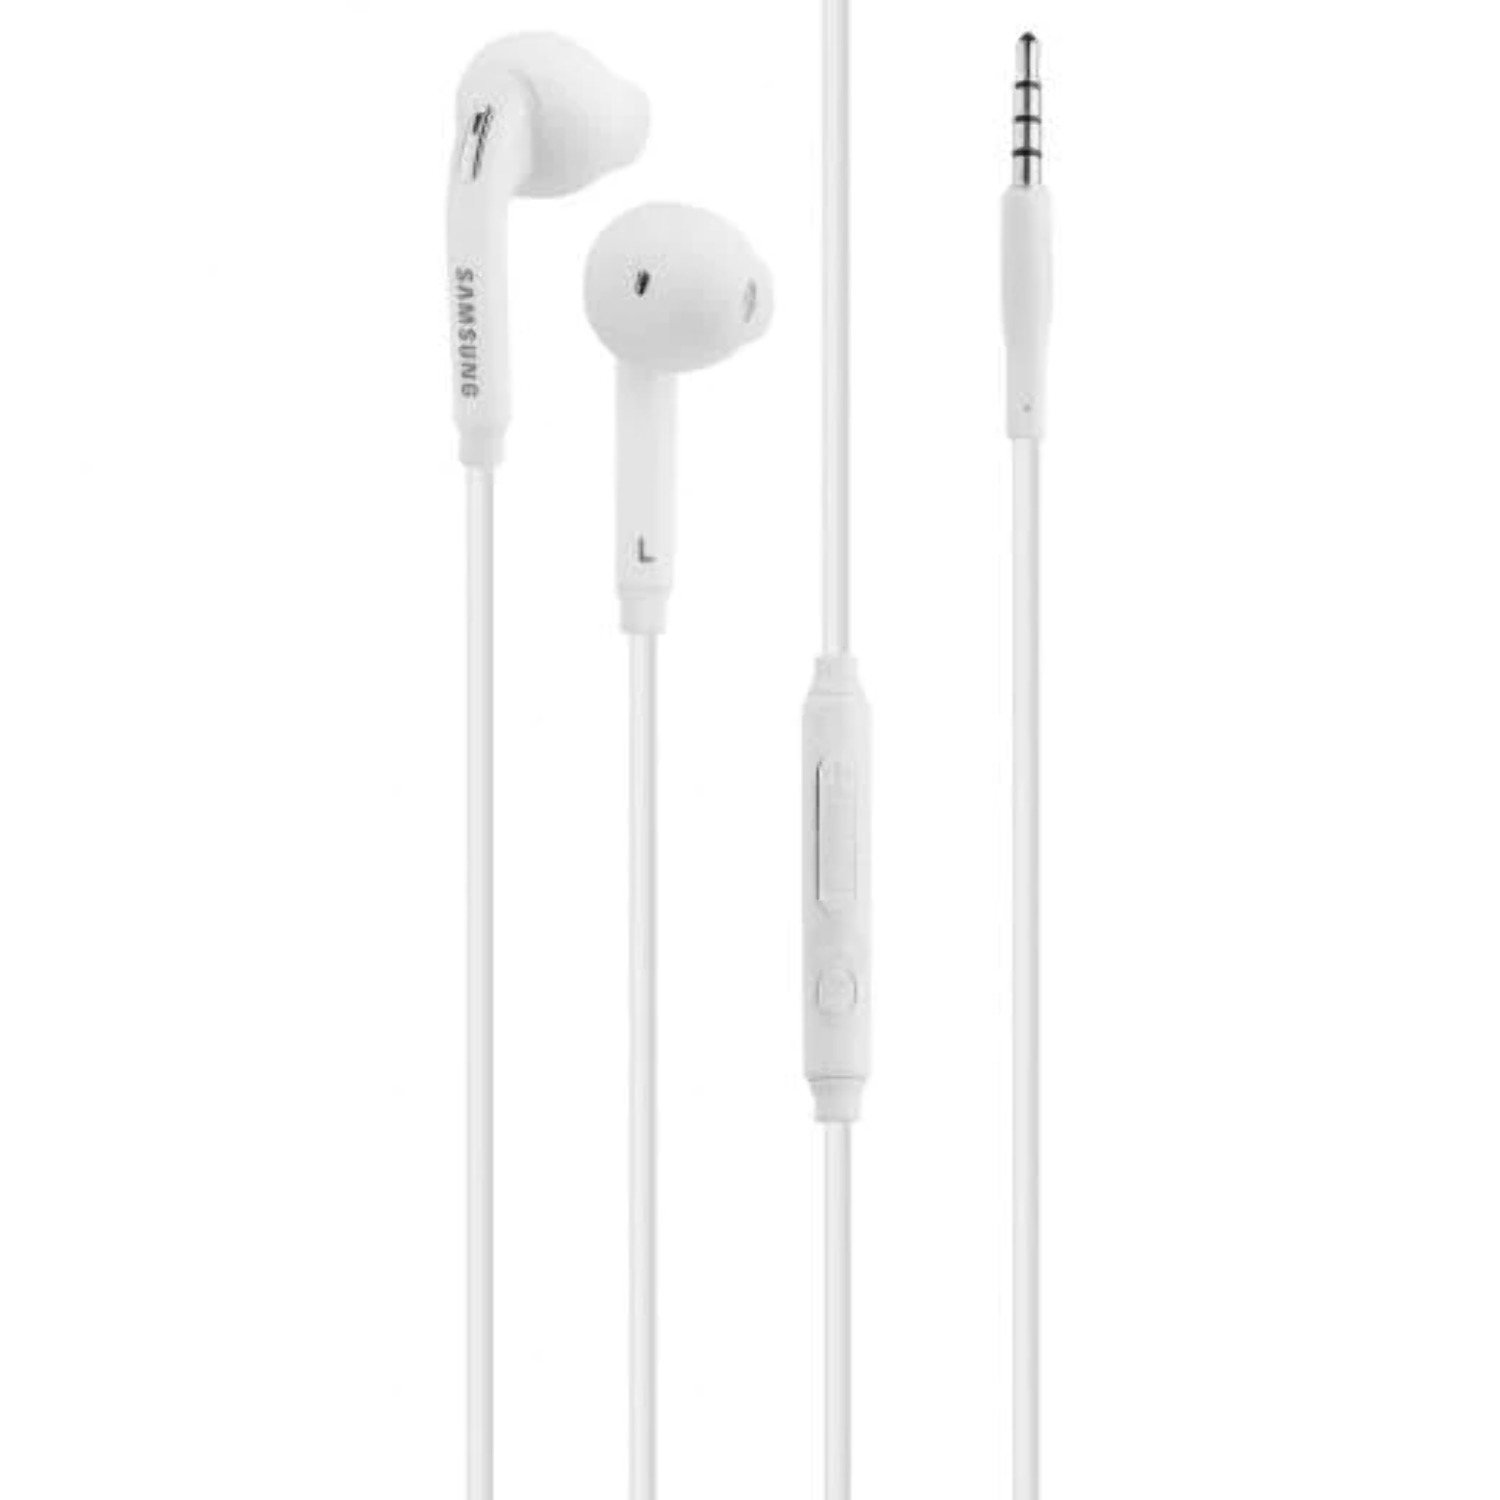 Premium Wired Headset 3.5mm Earbud Stereo In-Ear Headphones with in-line Remote & Microphone Compatible with Vodafone Smart V8 - image 1 of 1